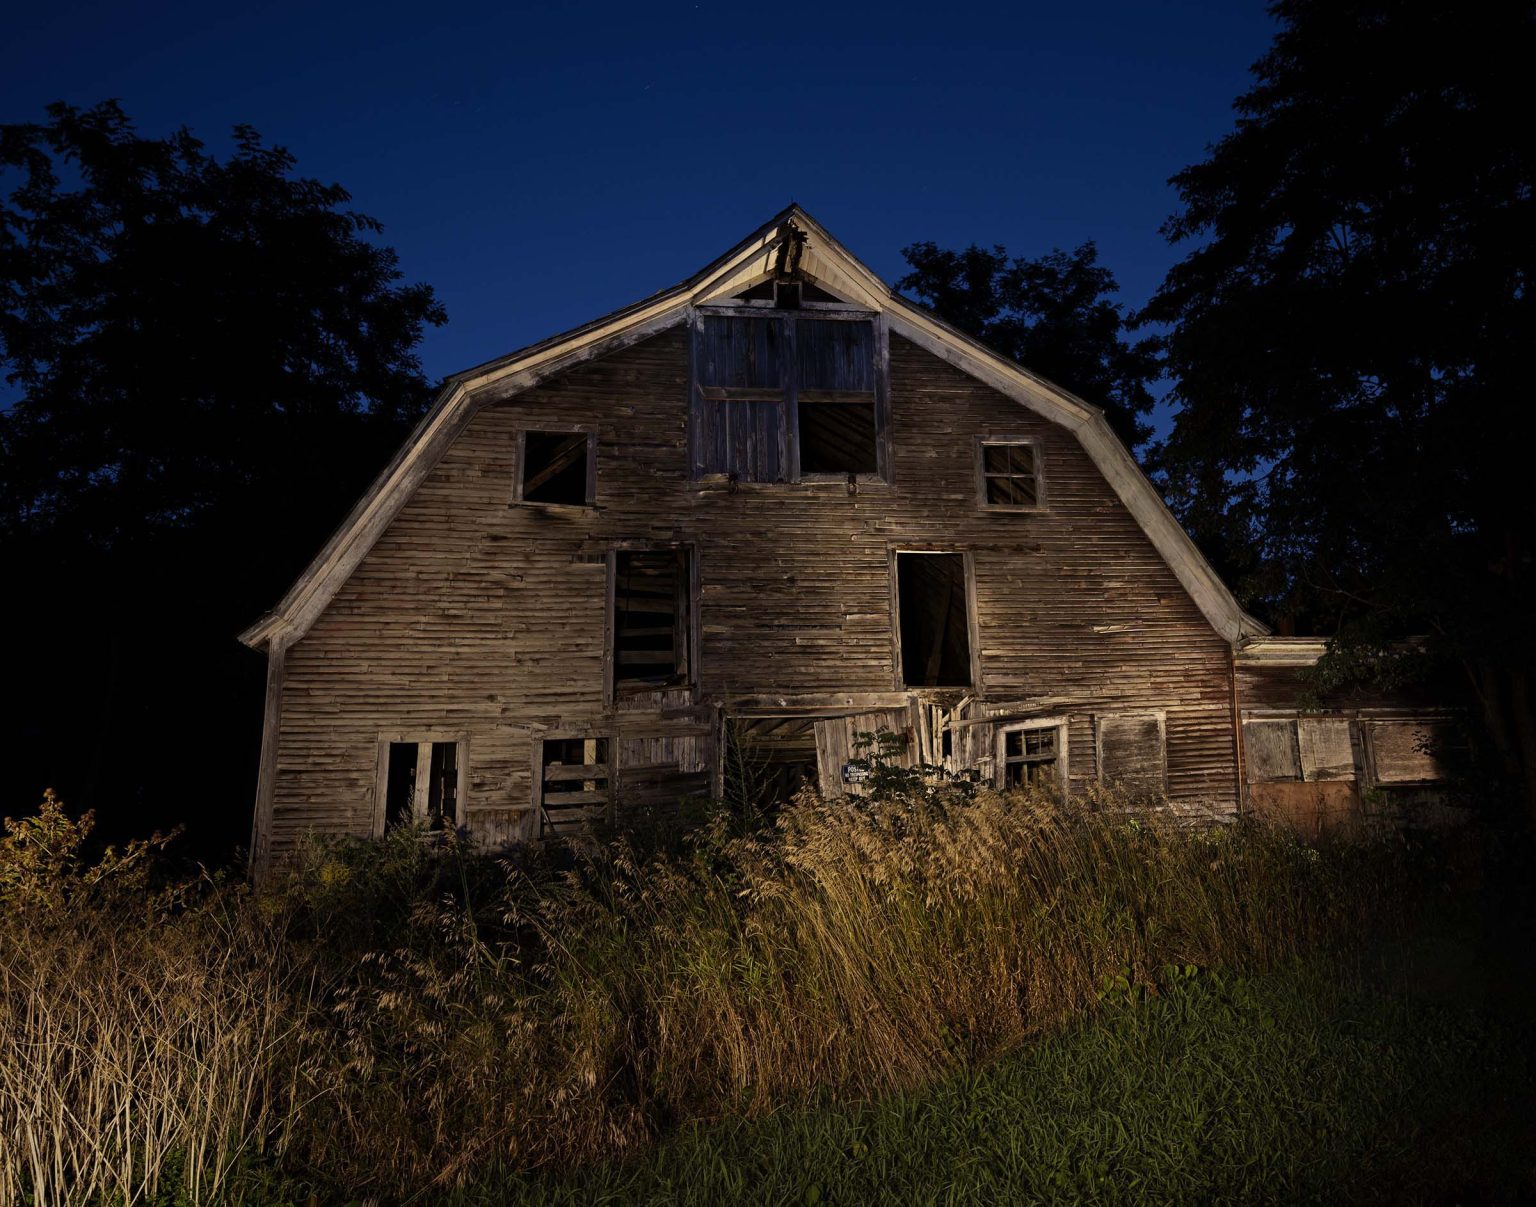 Night Photography, Light painting, Old Barn